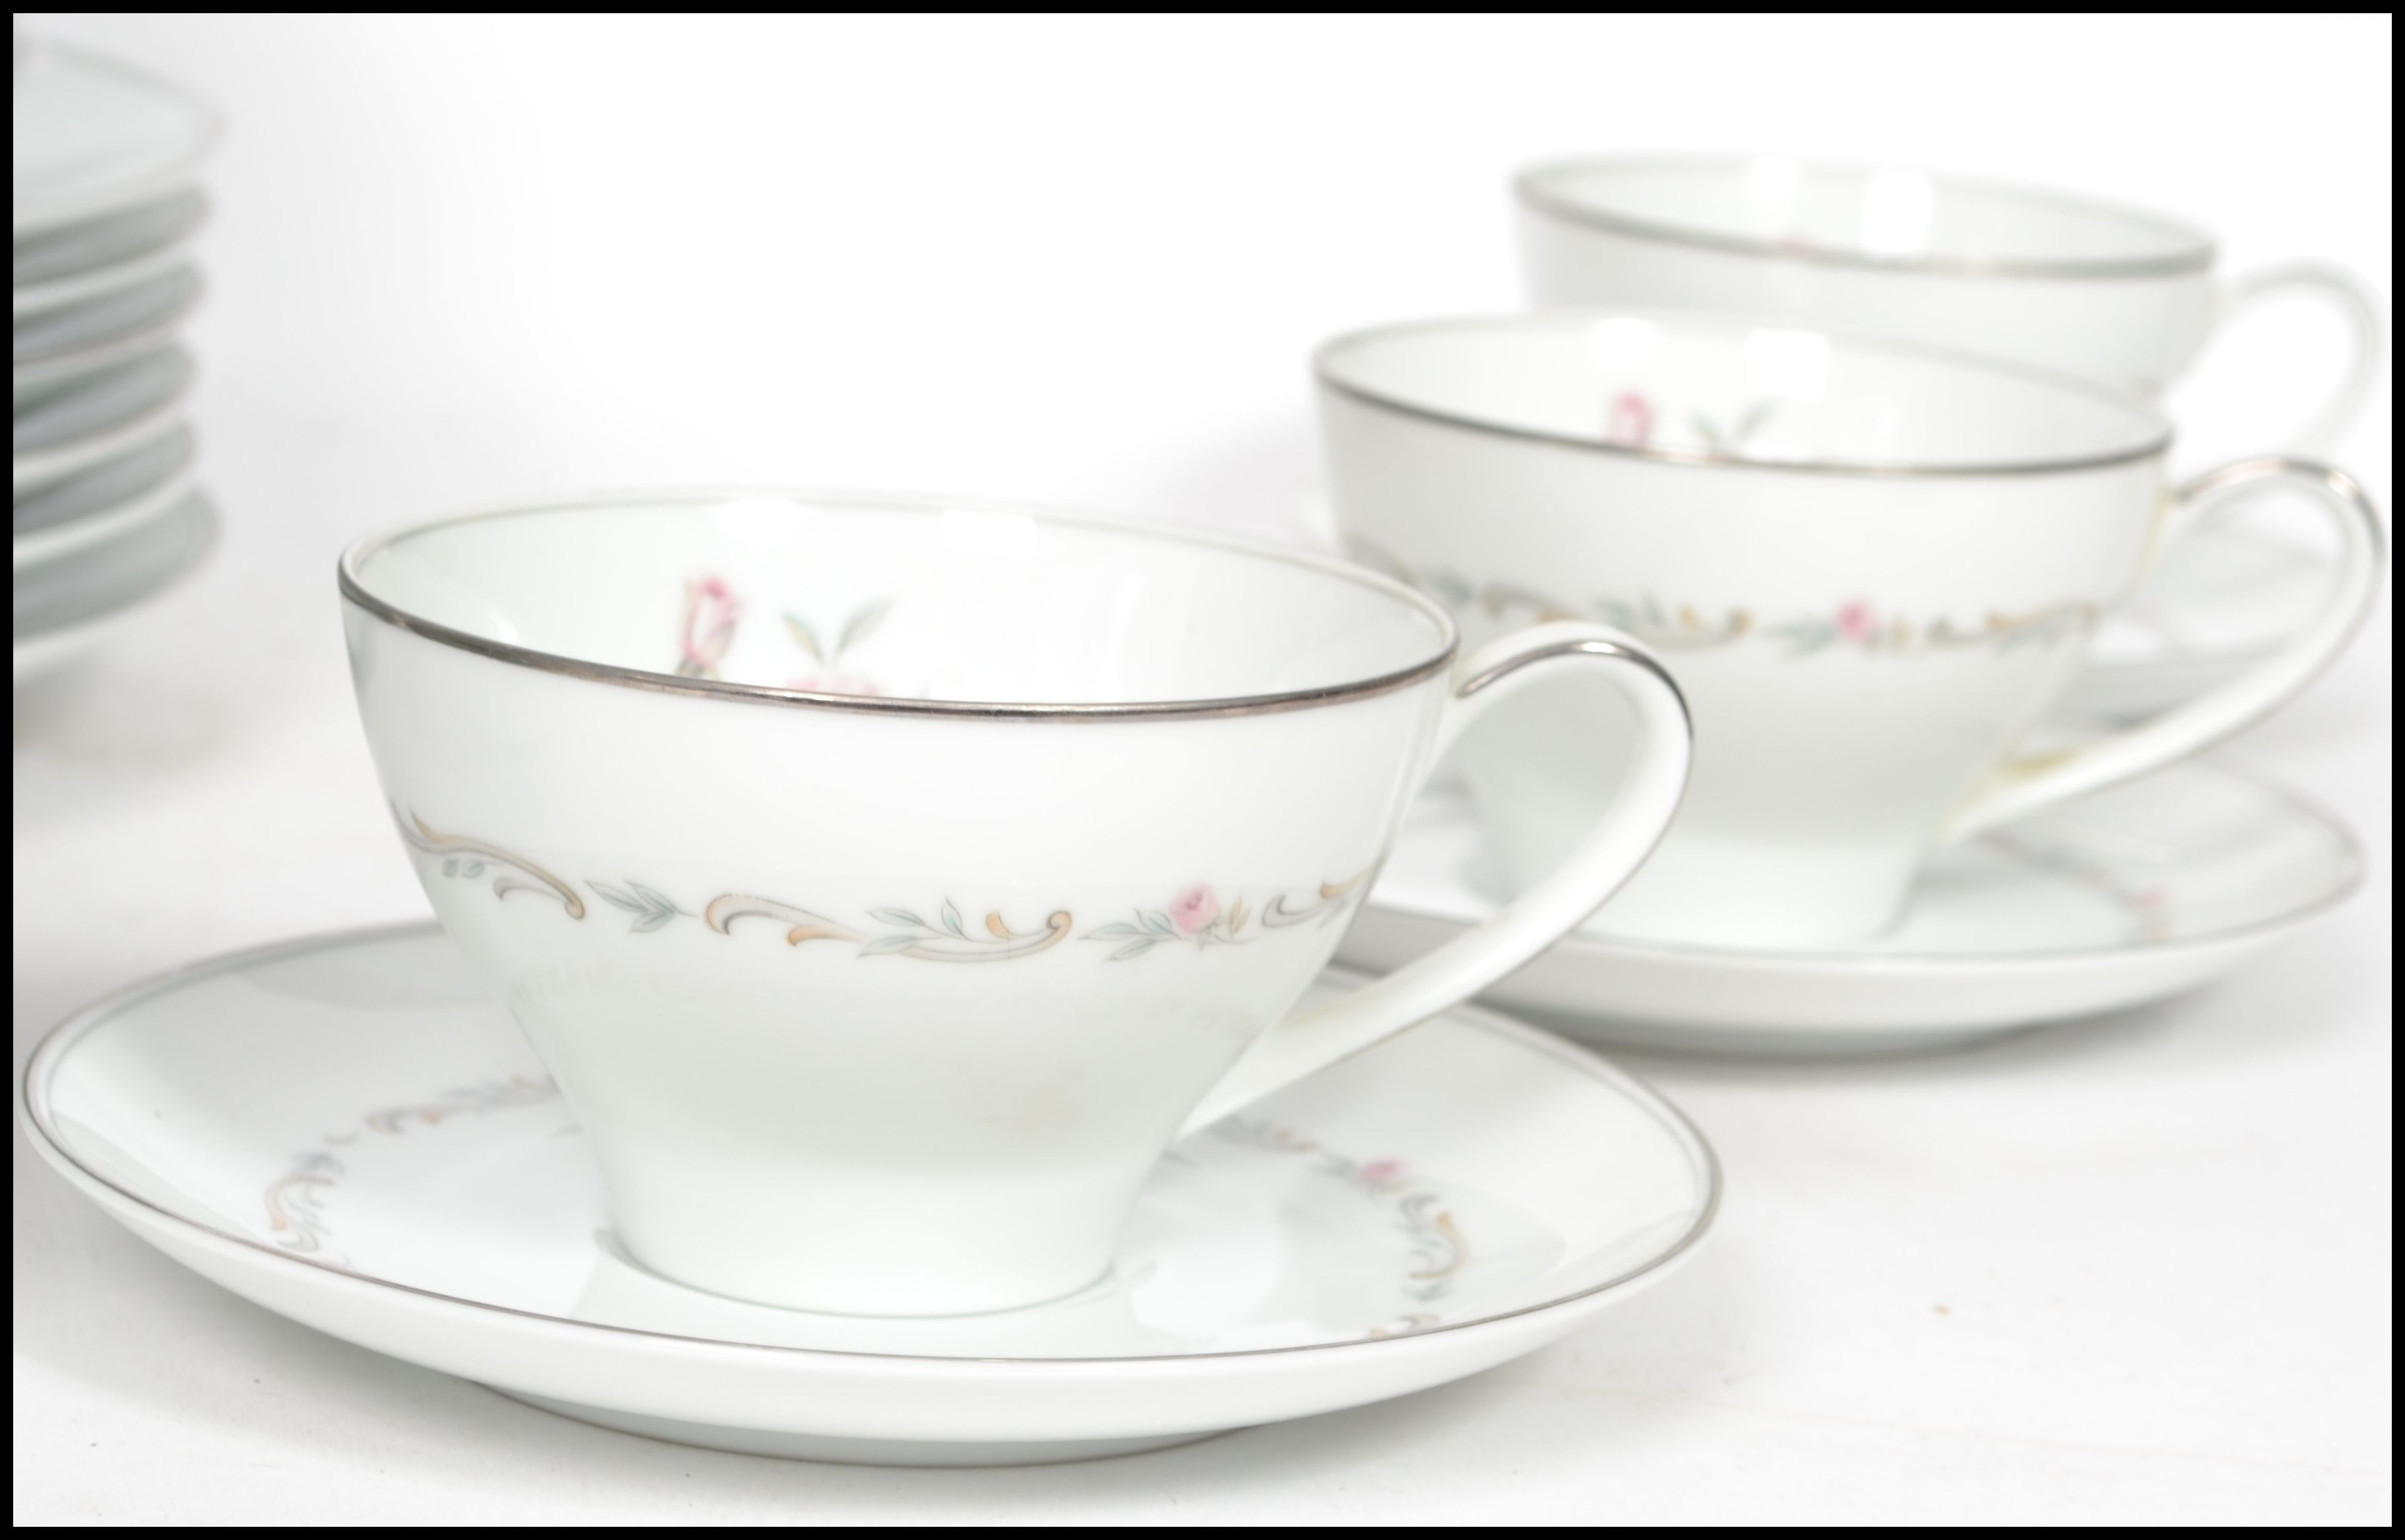 A Noritake 6 setting part tea and dinner service consisting of cups, saucer, side plates and - Image 5 of 7